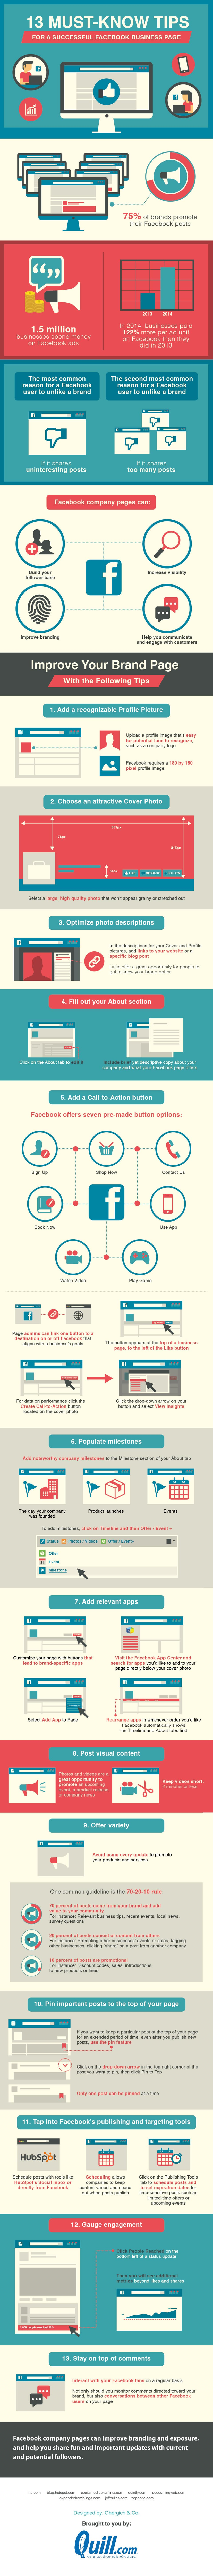 13 Must-Know Tips For A Successful Facebook Page [Infographic]